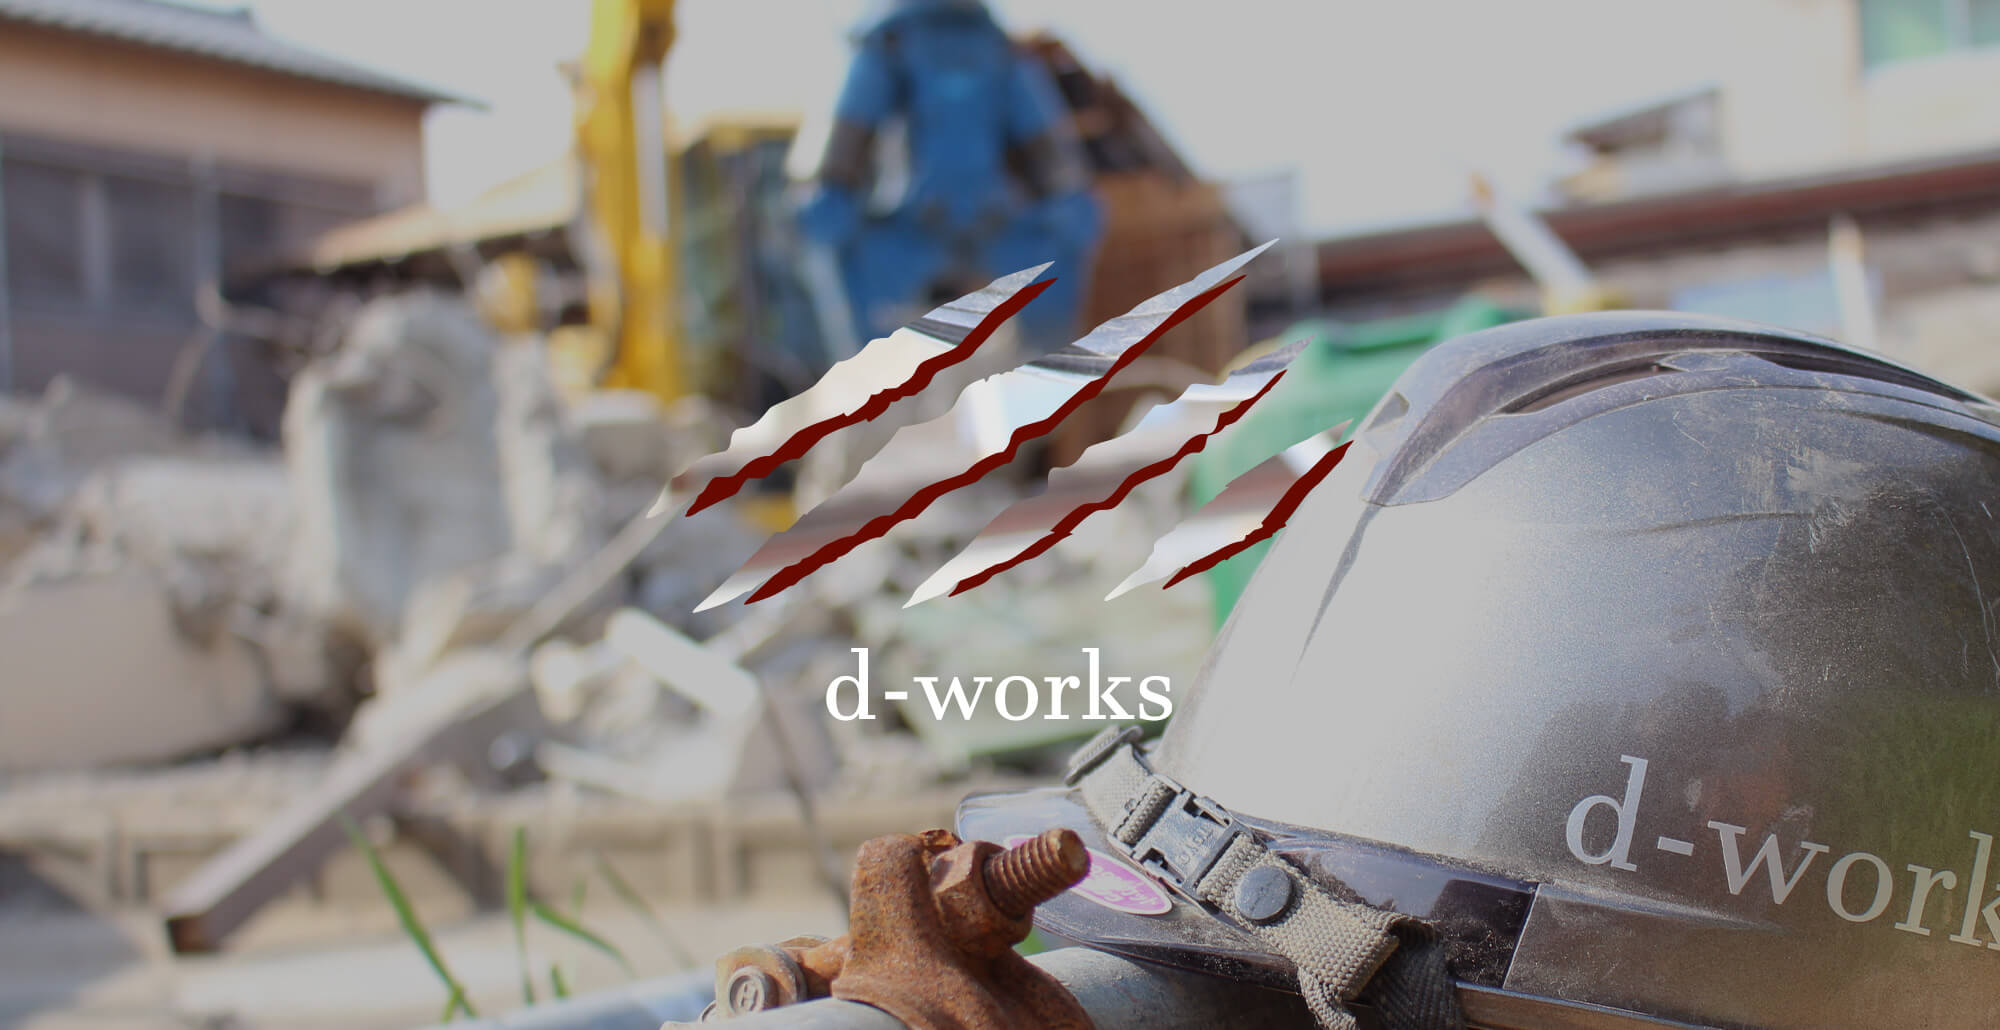 d-works